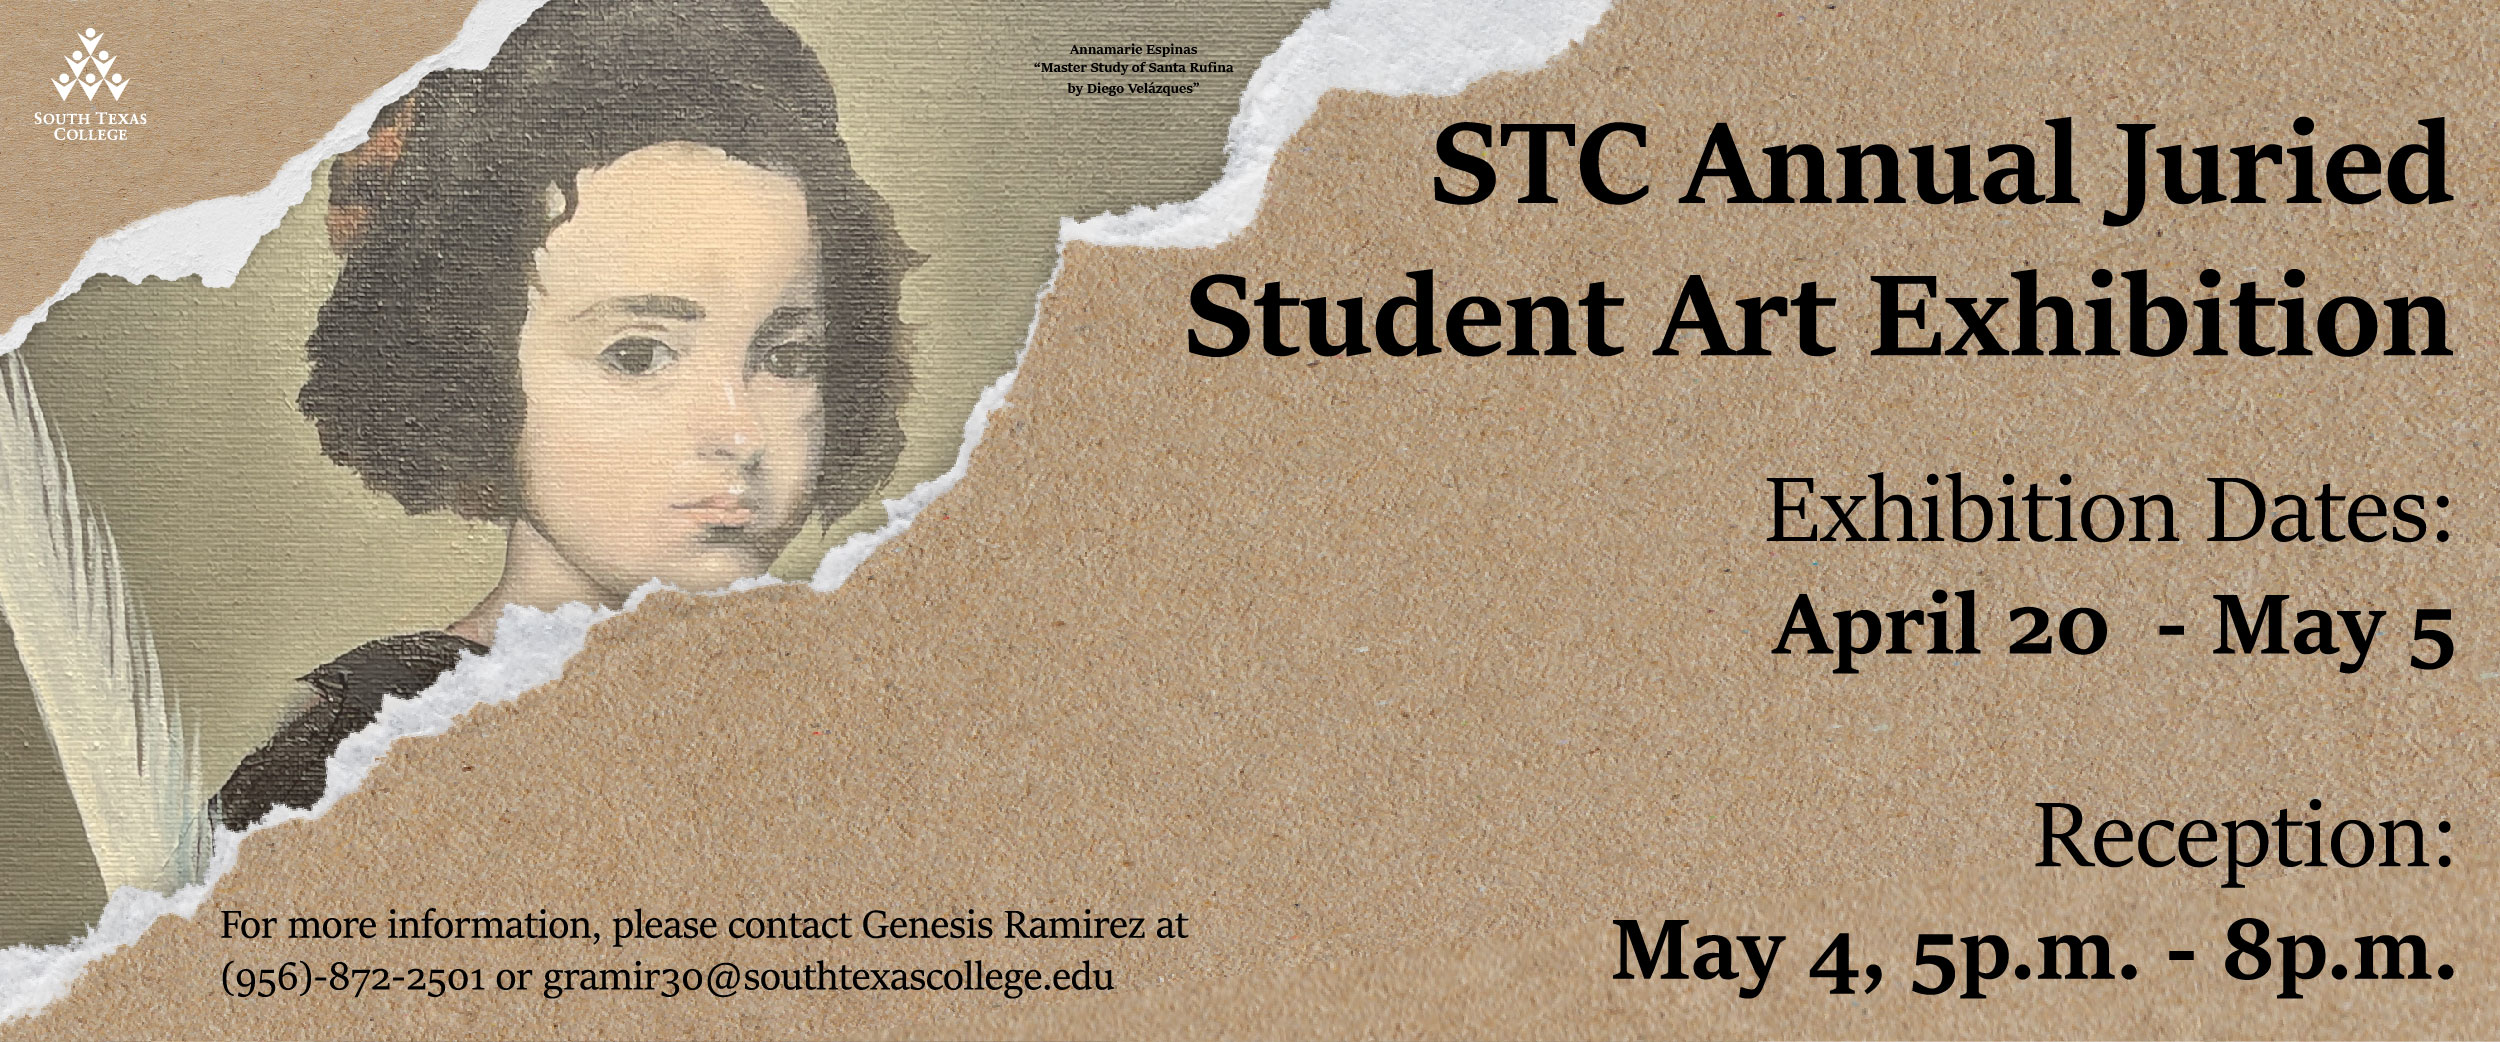 STC Annual Juried Student Art Exhibition